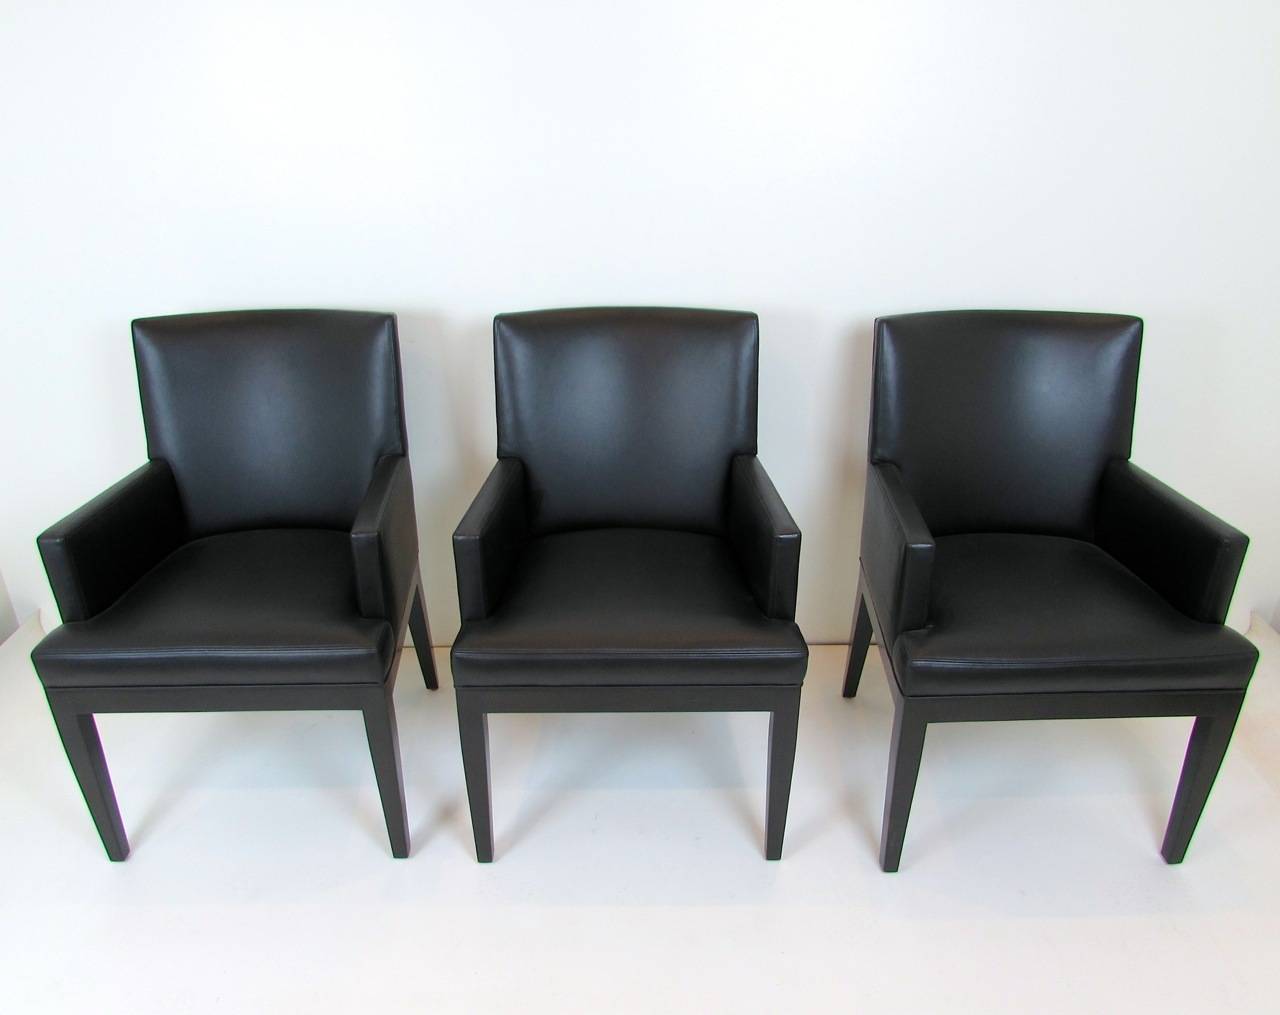 Set of six black leather dining armchairs by A. Rudin. Arm height: 26